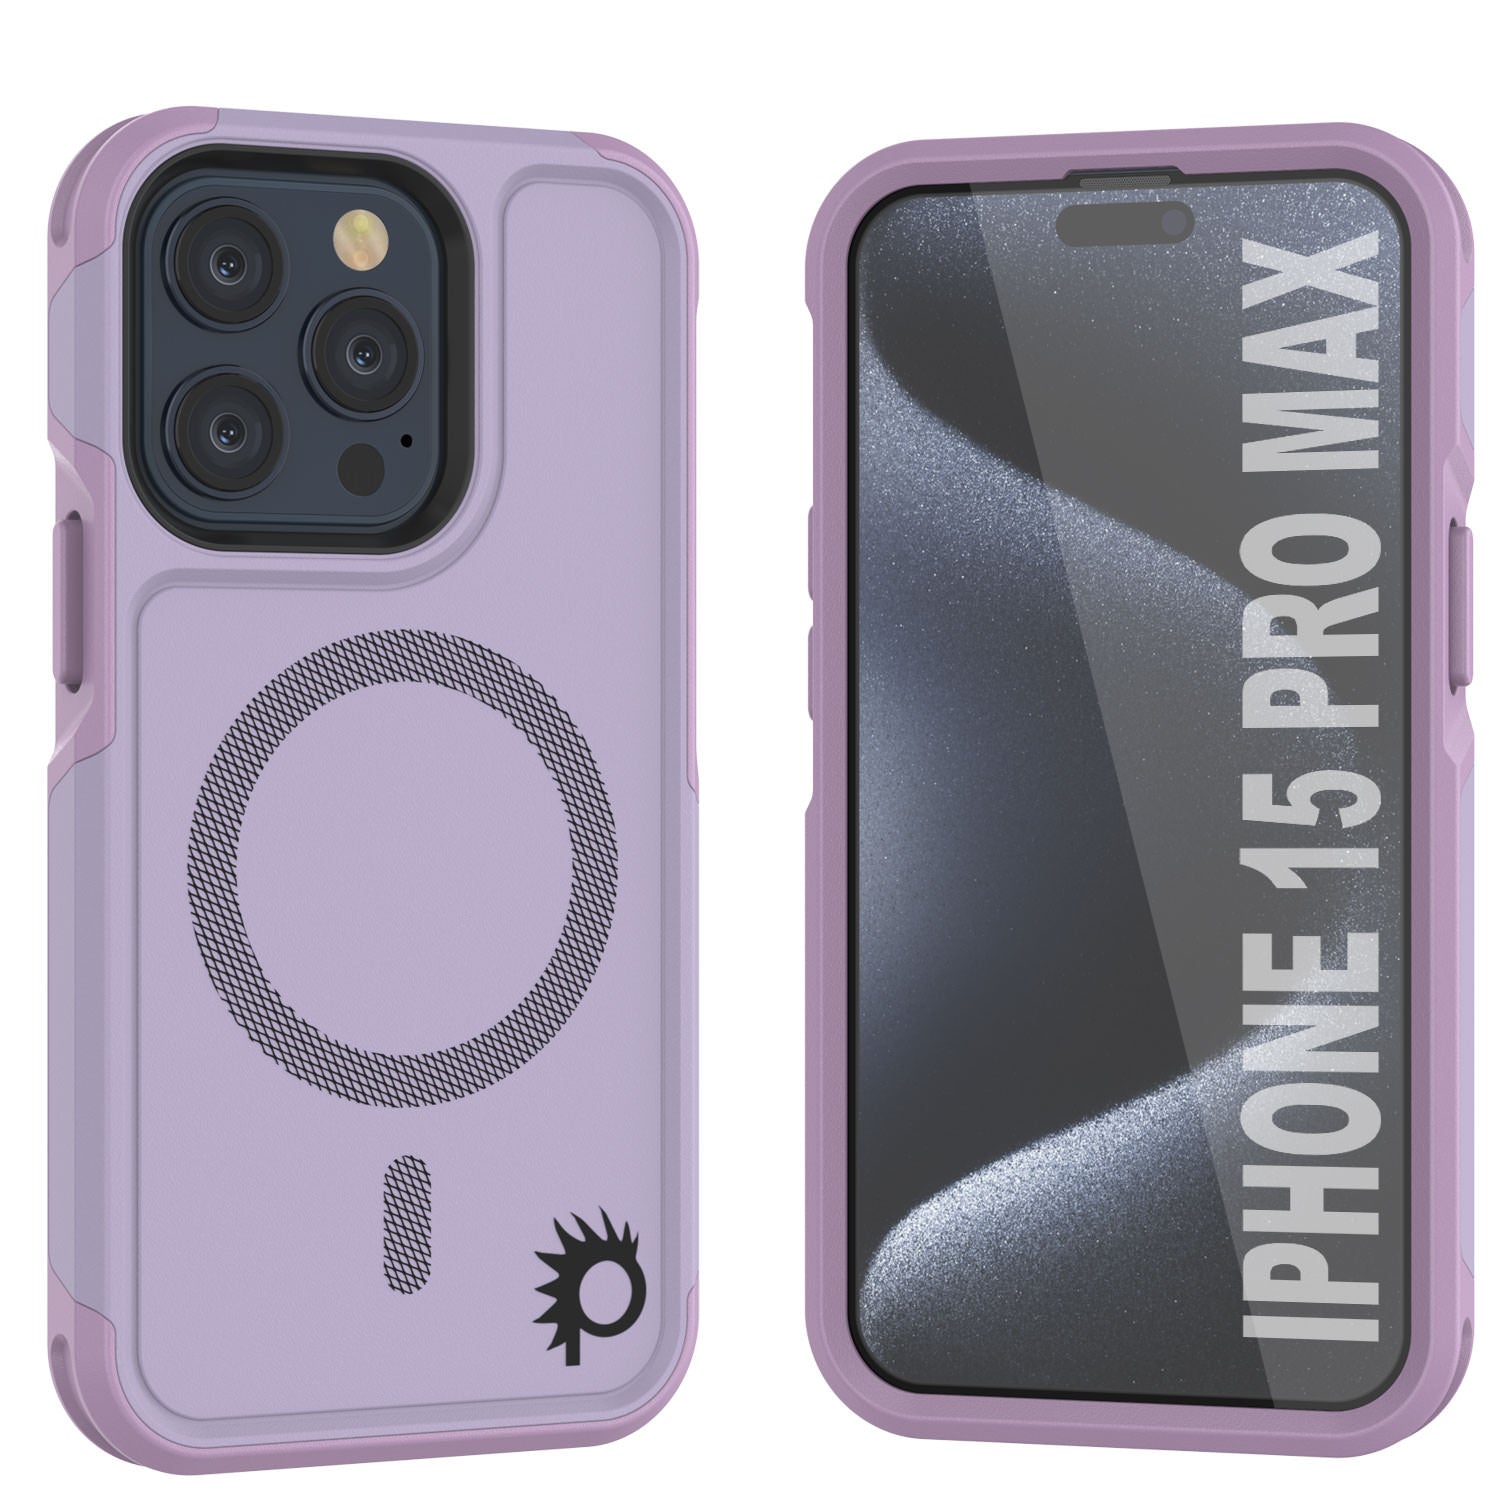 PunkCase iPhone 15 Pro Max Case, [Spartan 2.0 Series] Clear Rugged Heavy Duty Cover W/Built in Screen Protector [lilac]